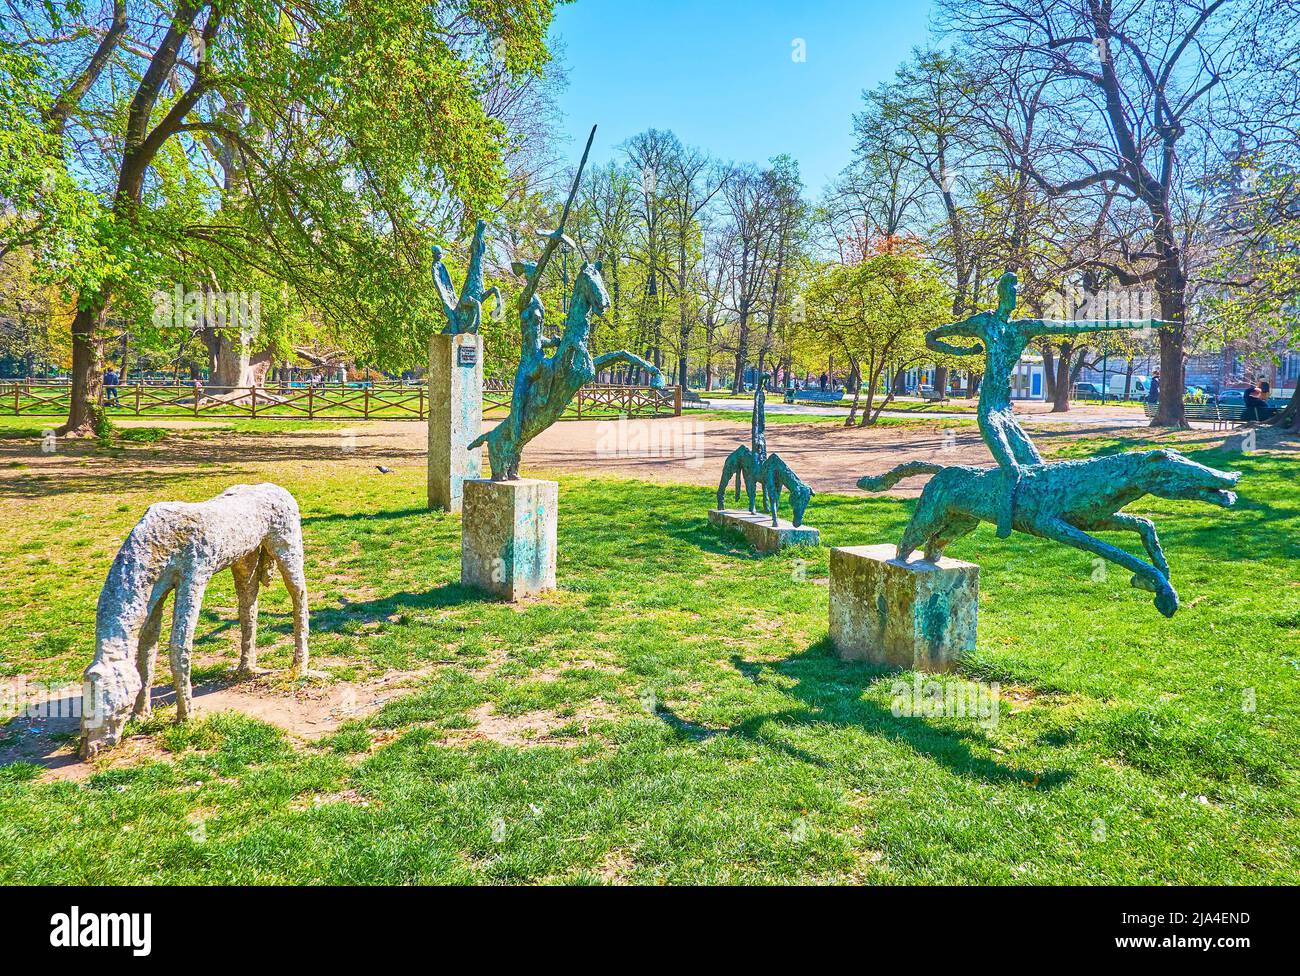 MILAN, ITALY - APRIL 5, 2022: The modern bronze sculptures of Four Horsemen of the Apocalypse in Public park of Indro Montanelli, on April 5 in Milan, Stock Photo